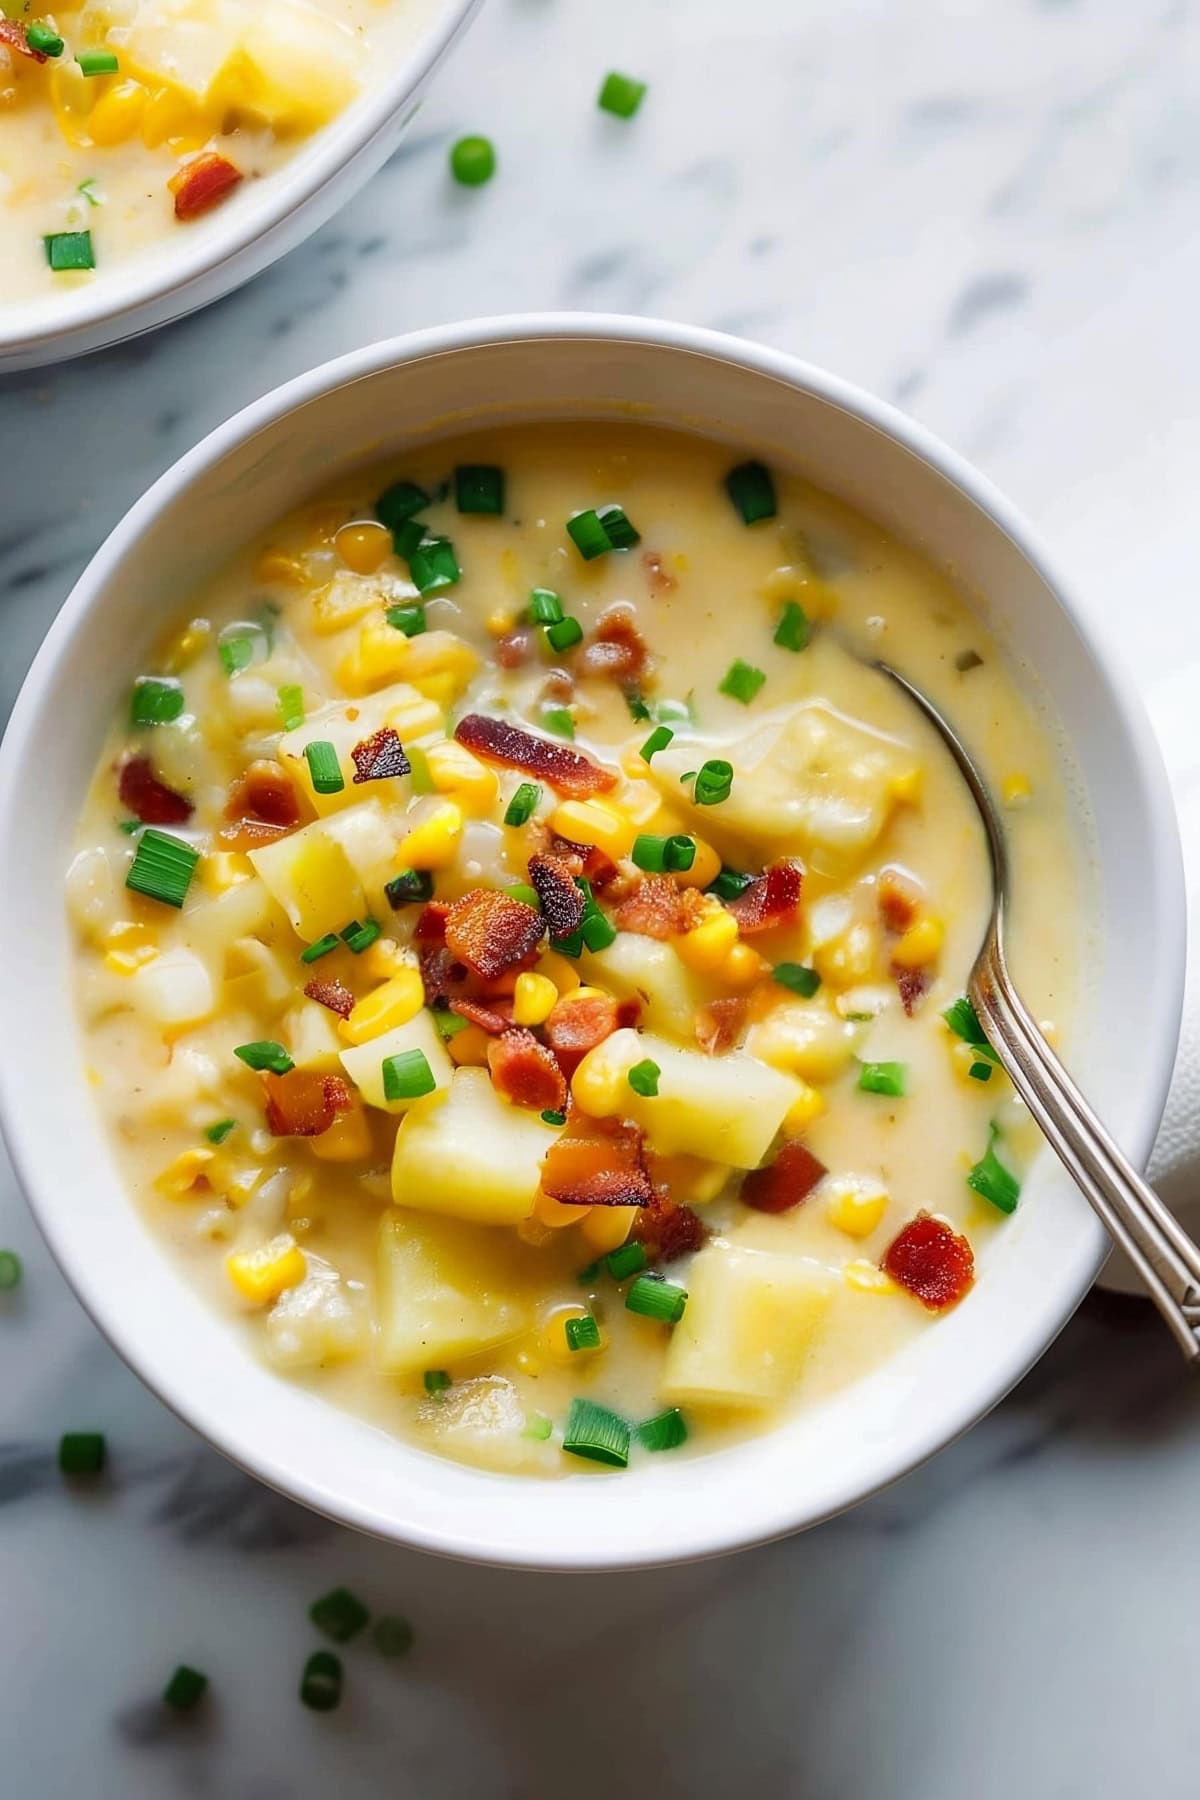 Corn chowder with bacon, potatoes and chives served hot in a white bowl.